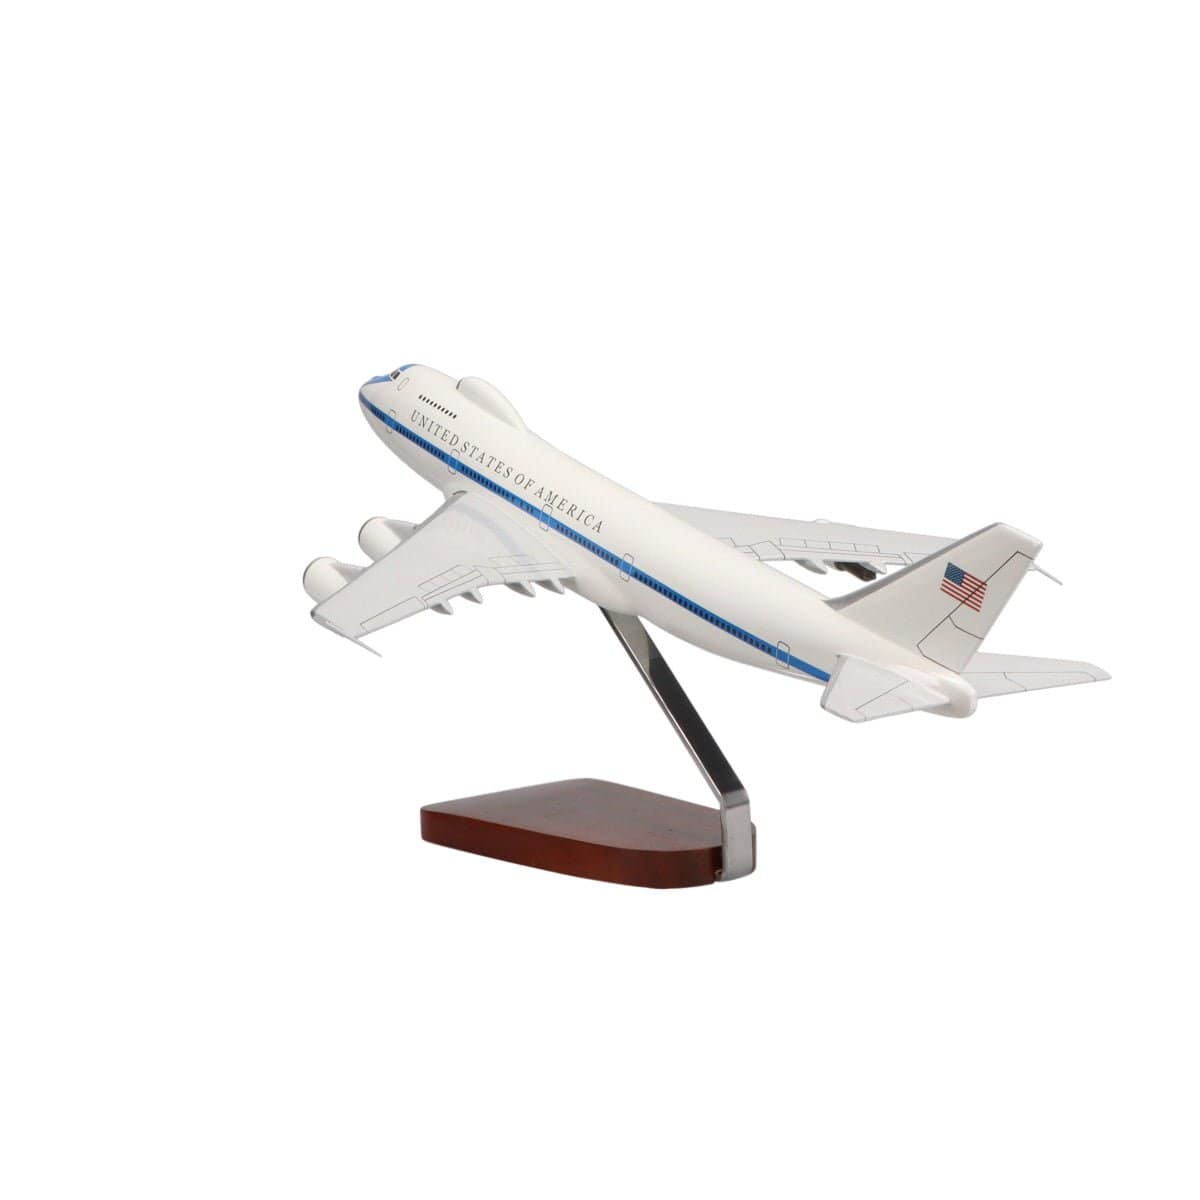 Boeing™ E-4 Advanced Airborne Command Post Limited Edition Large Mahog